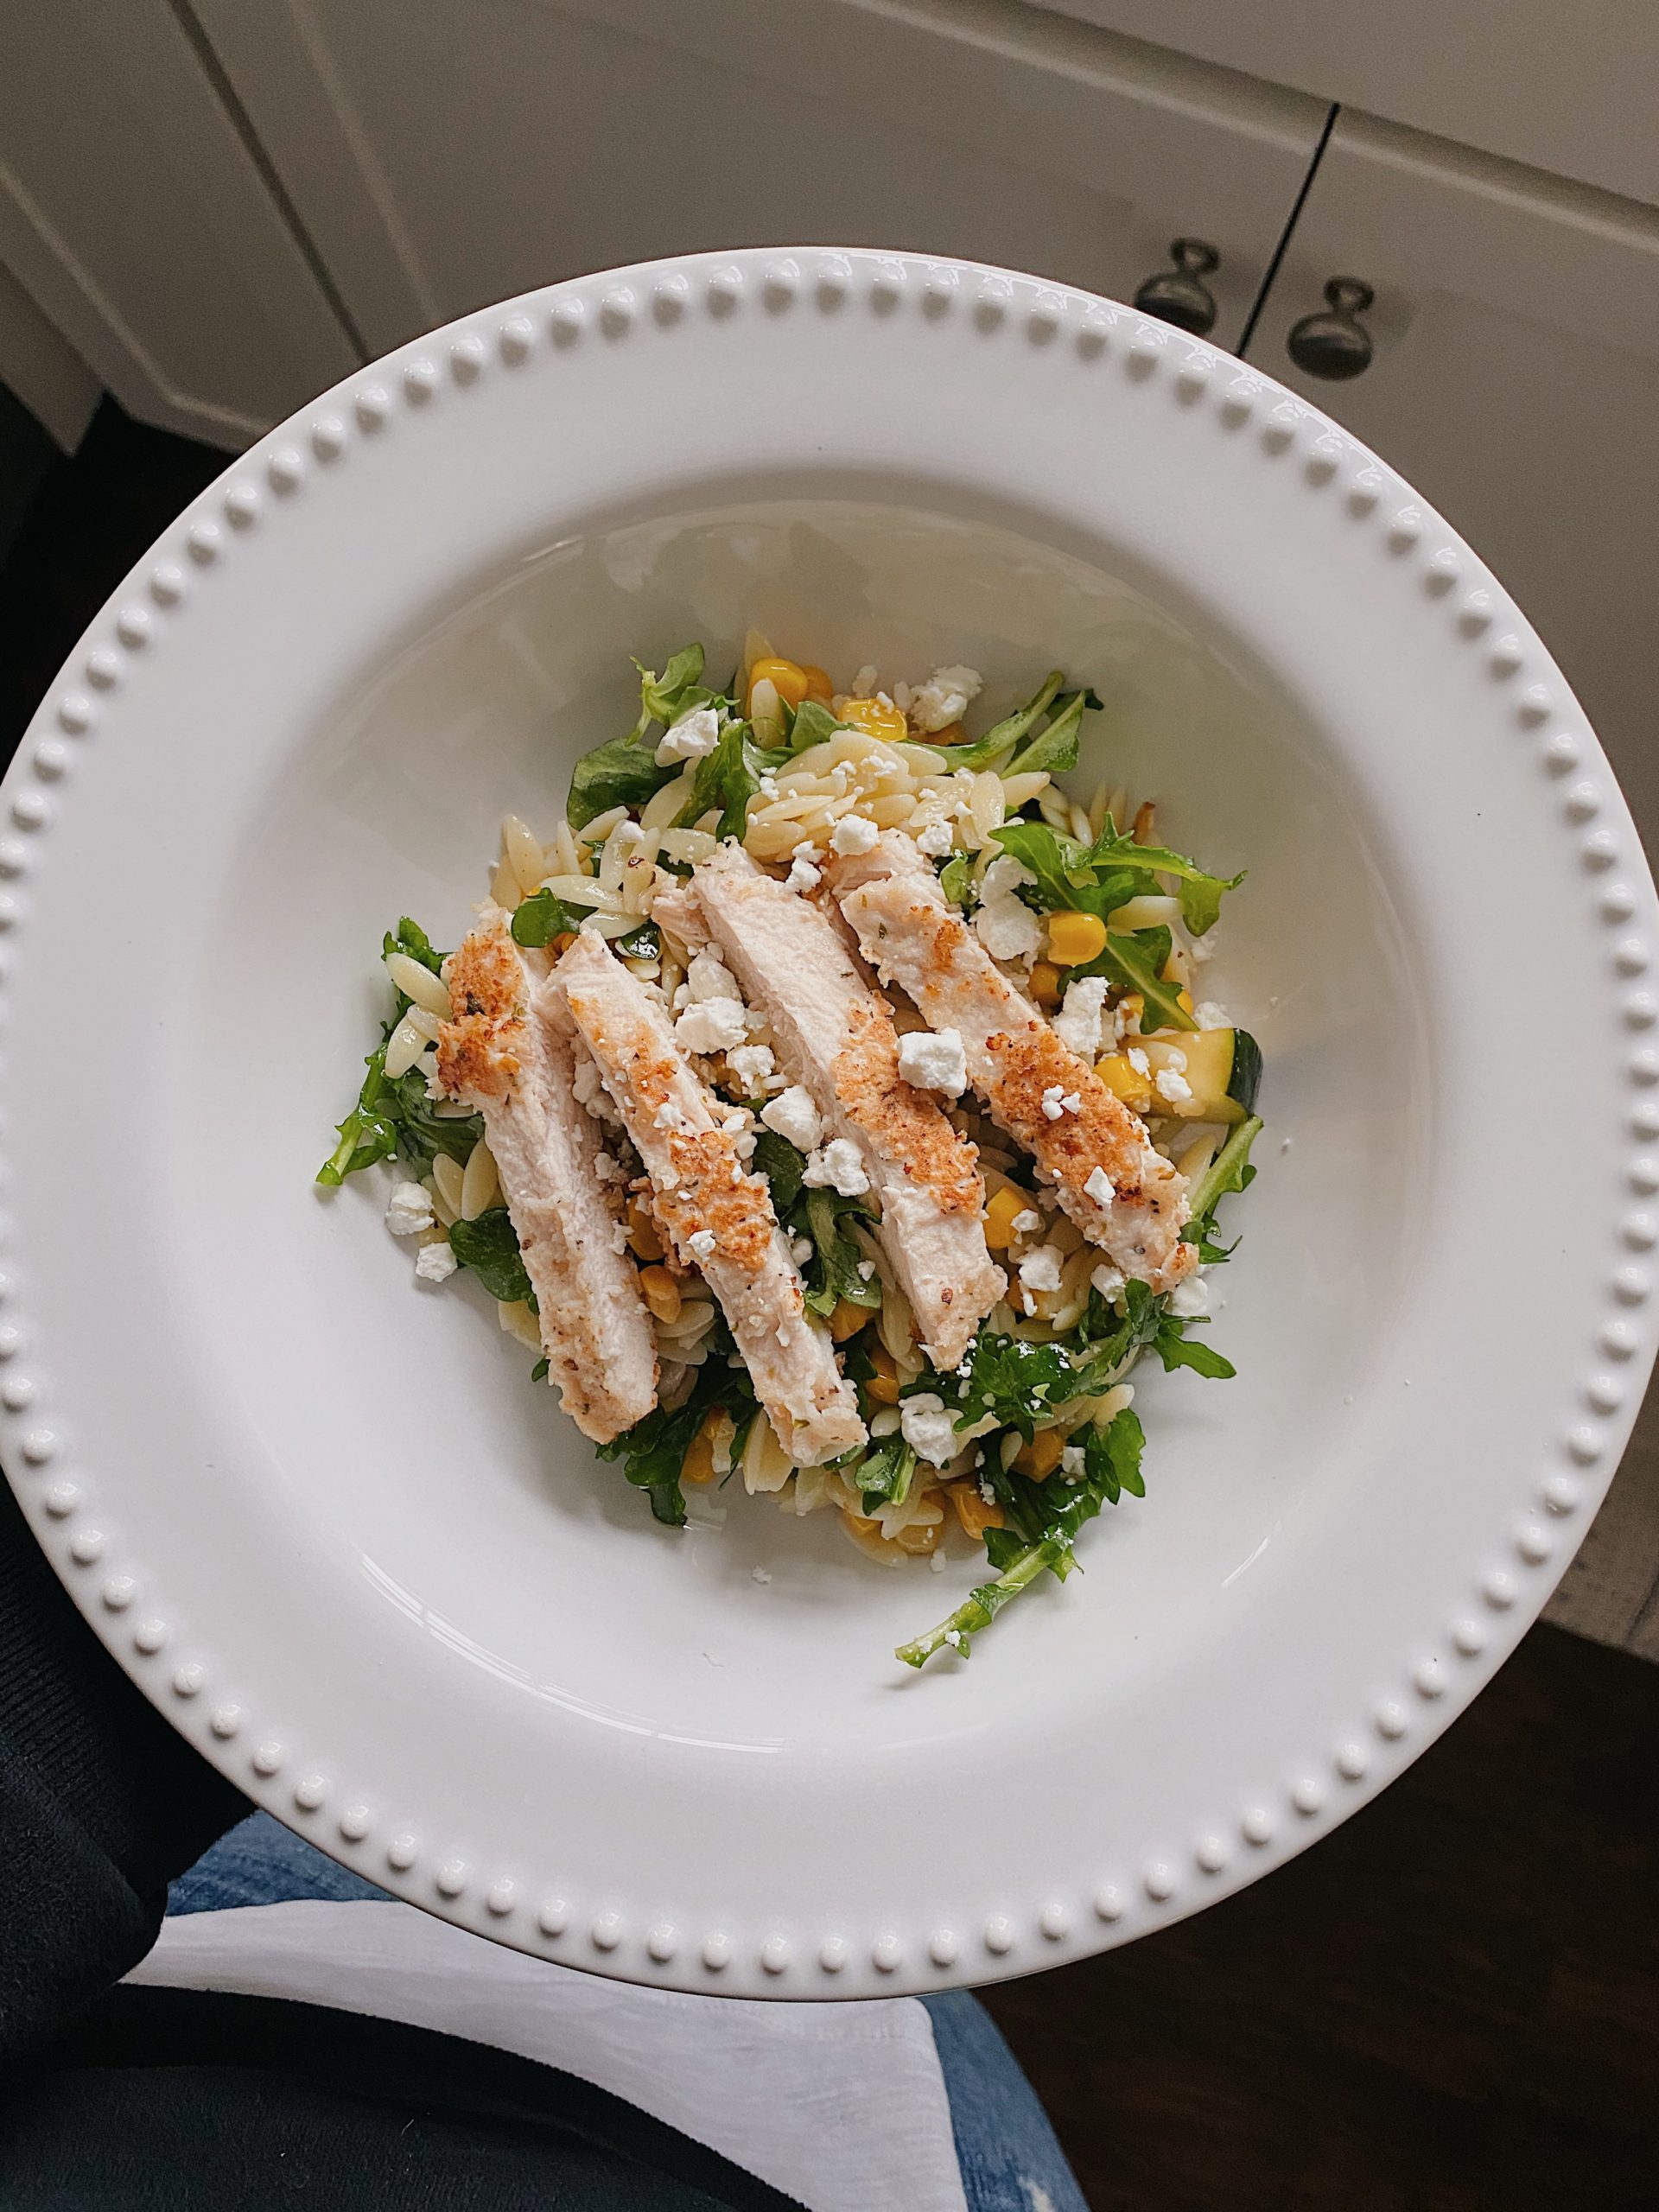 Grilled Chicken and Vegetable Orzo Salad